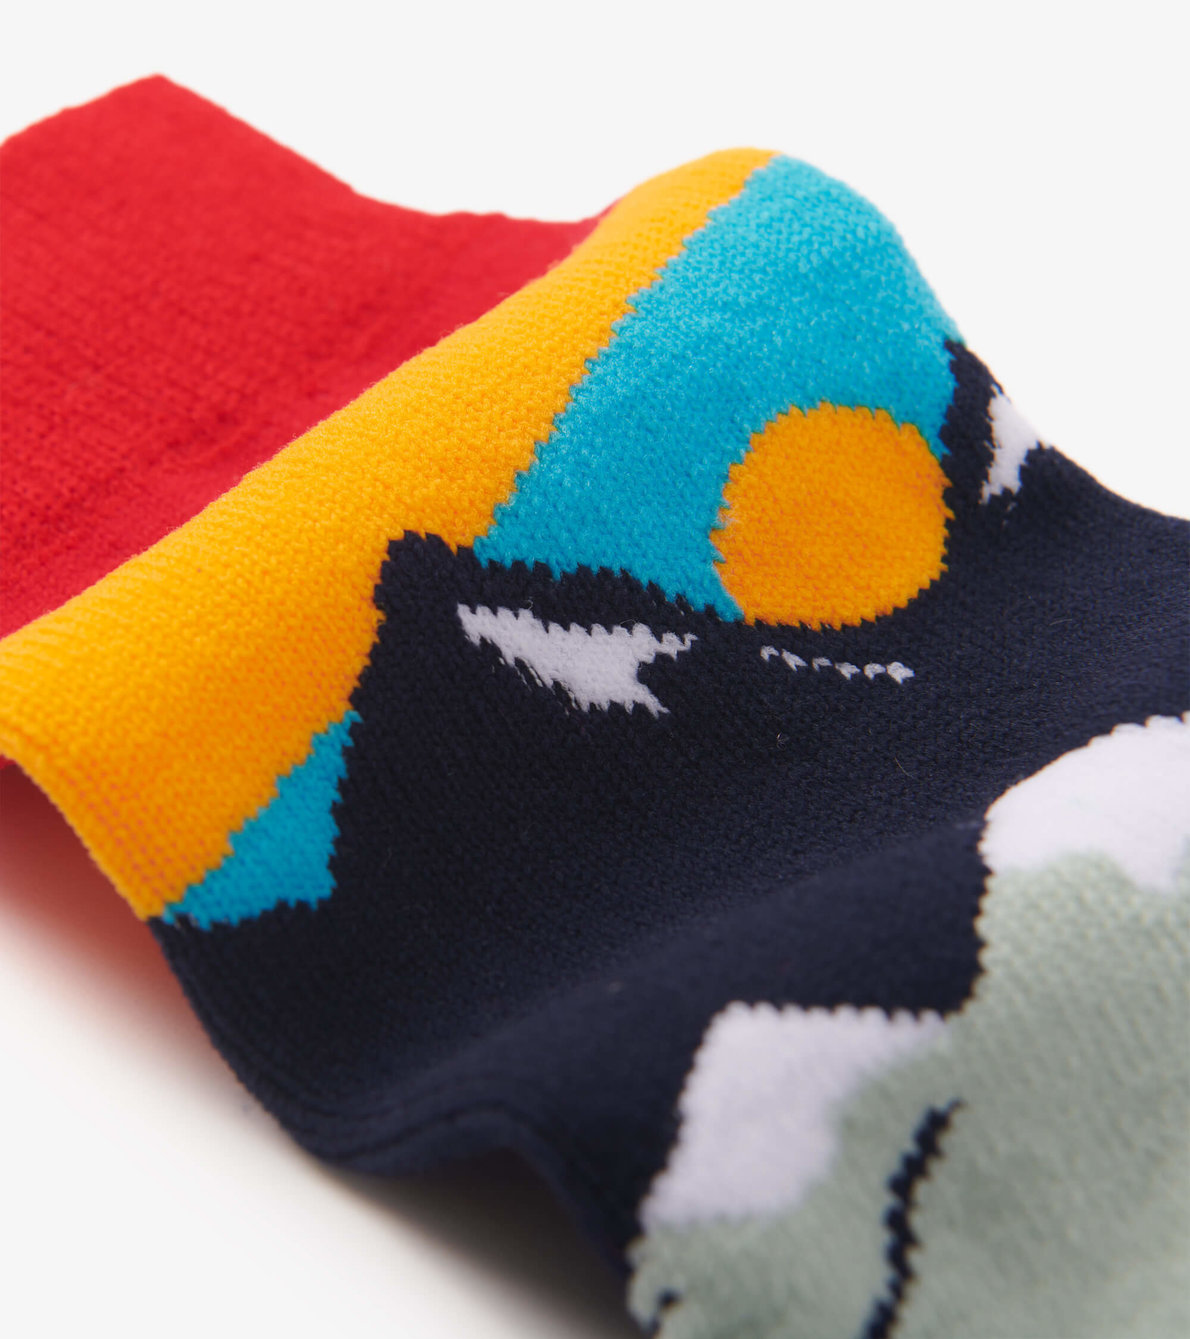 View larger image of Hiking Cozy Socks